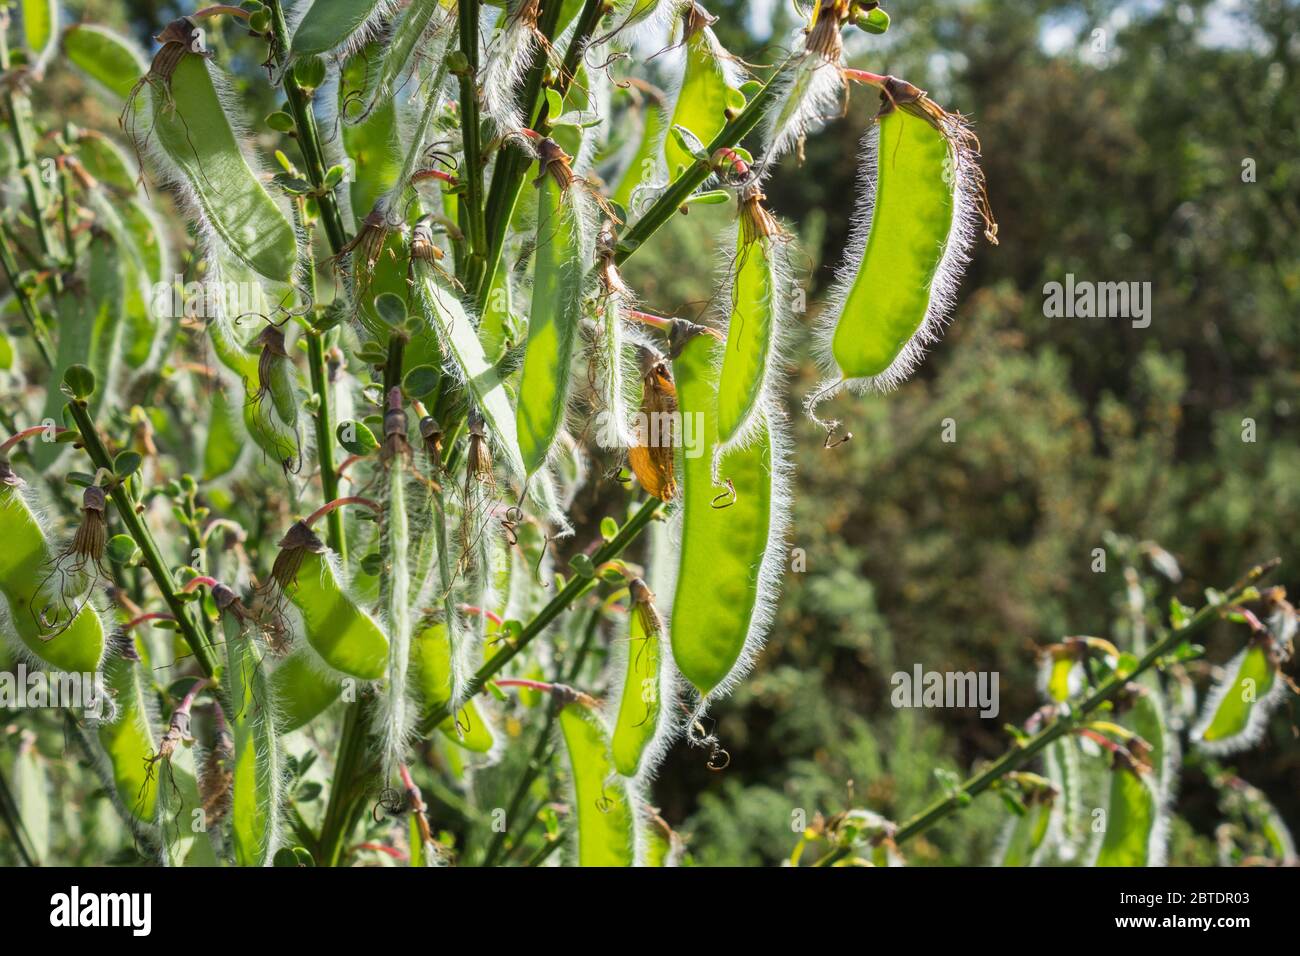 Sunlight radiating through seed pods or legumes of Cytisus scoparius or Scotch broom Stock Photo